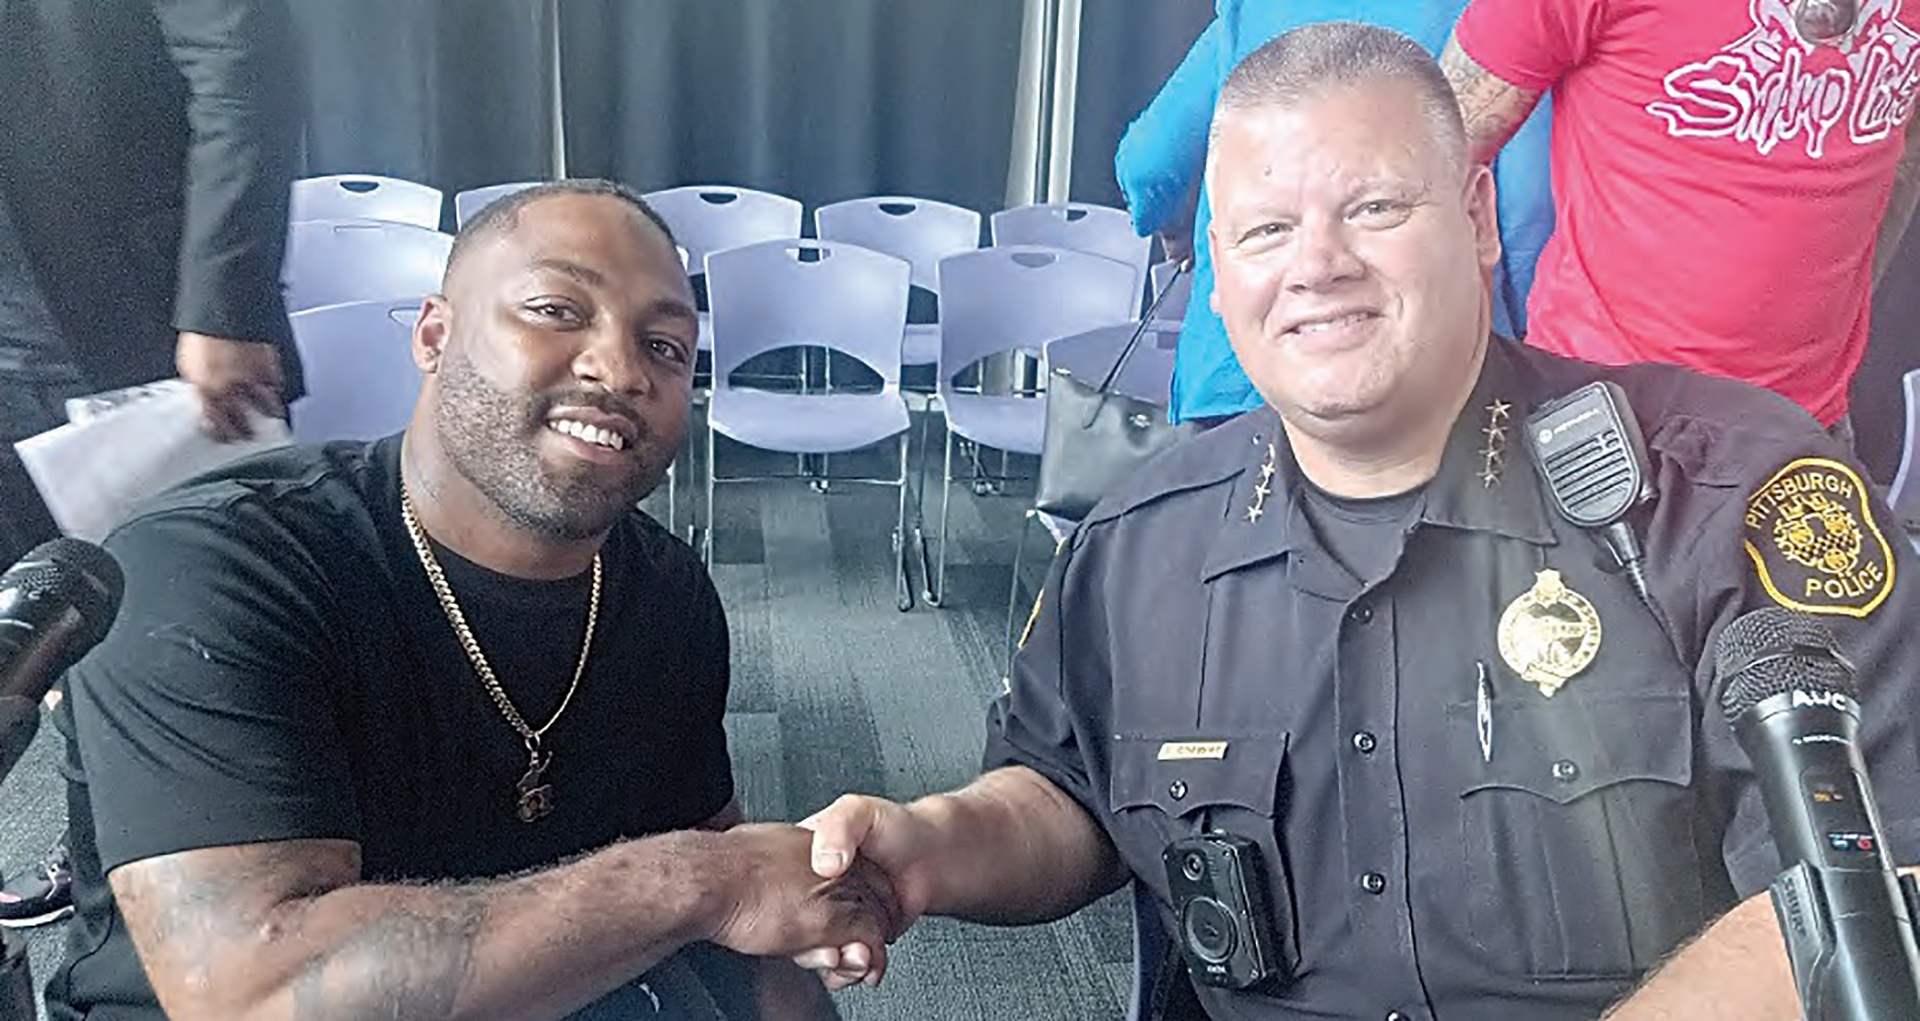 Leon Ford teams up with former Chief of Police Scott Schubert for ‘The Hear Foundation’